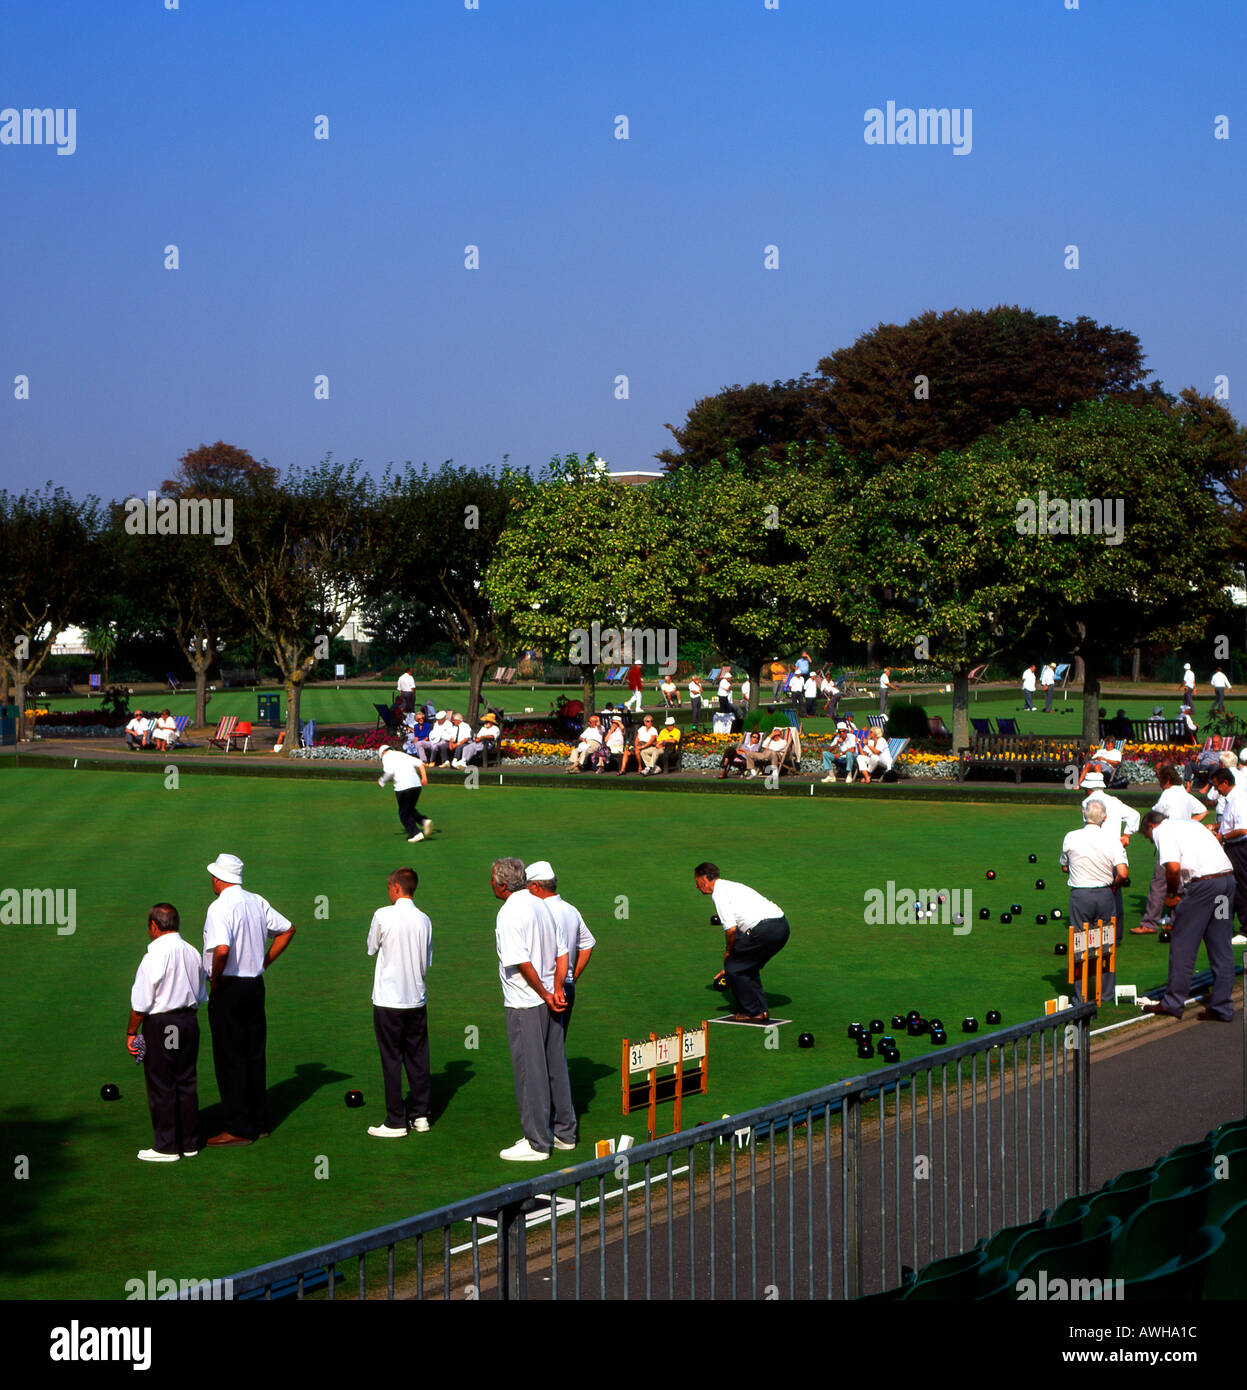 Lawn Bowling at Worthing England Stock Photo